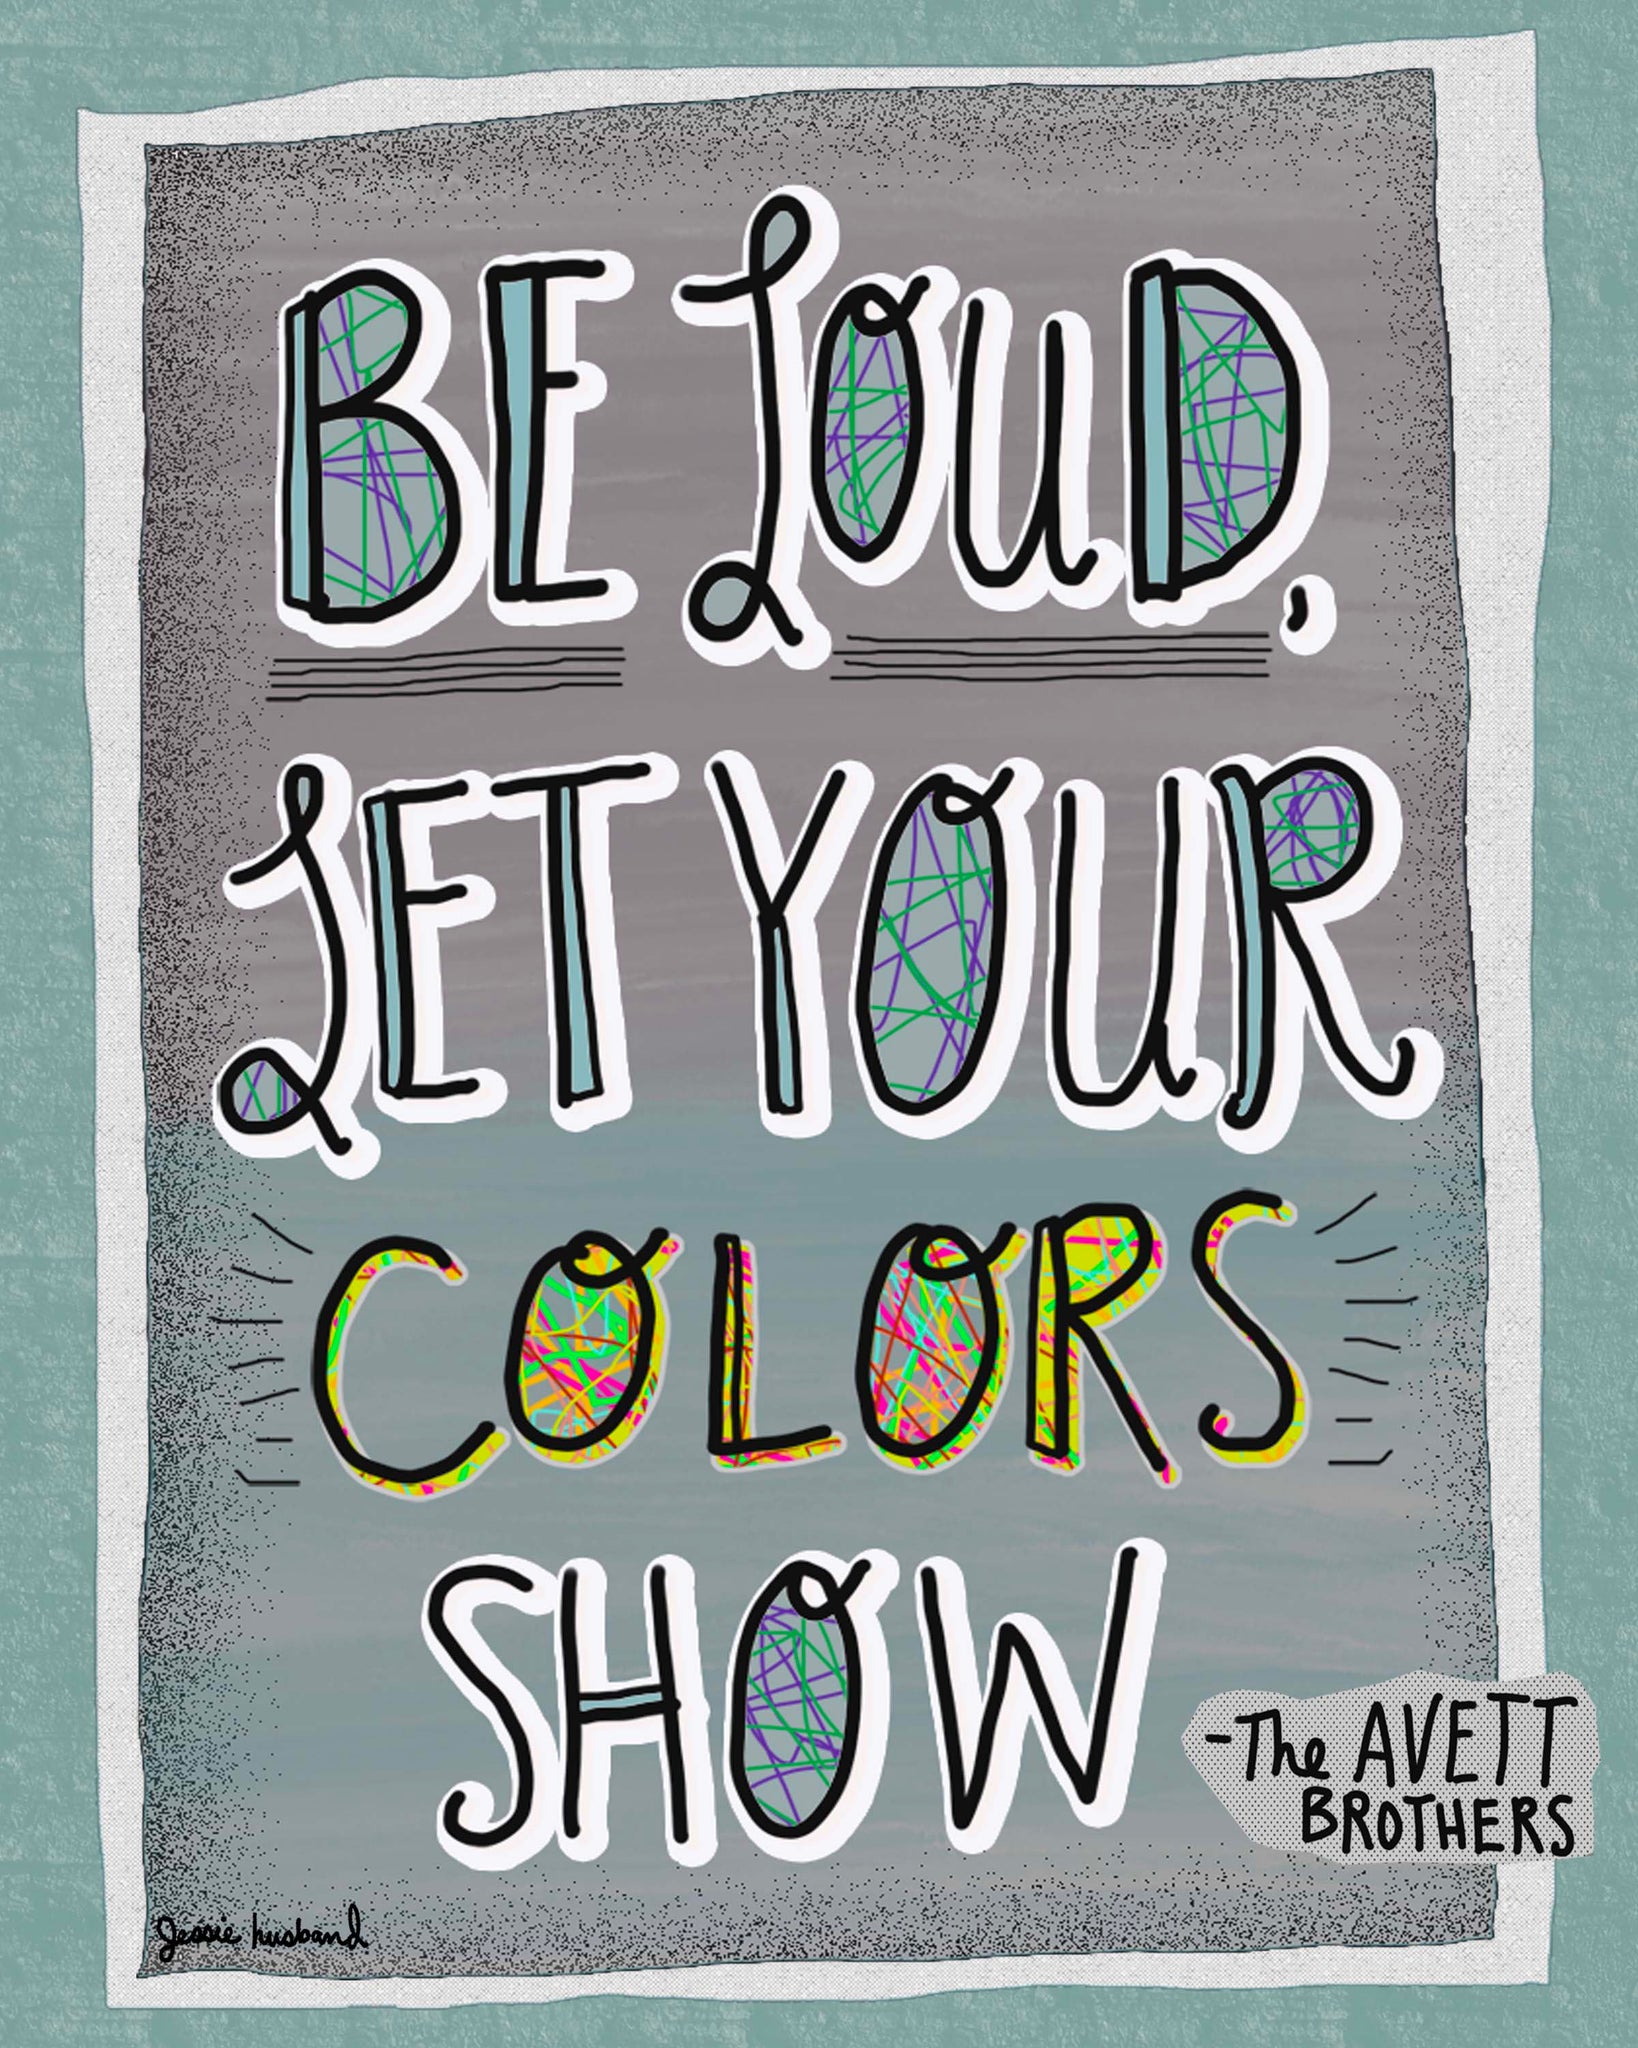 Be Loud, Let Your Colors Show, Avett Brothers Lyric Print, Colorshow